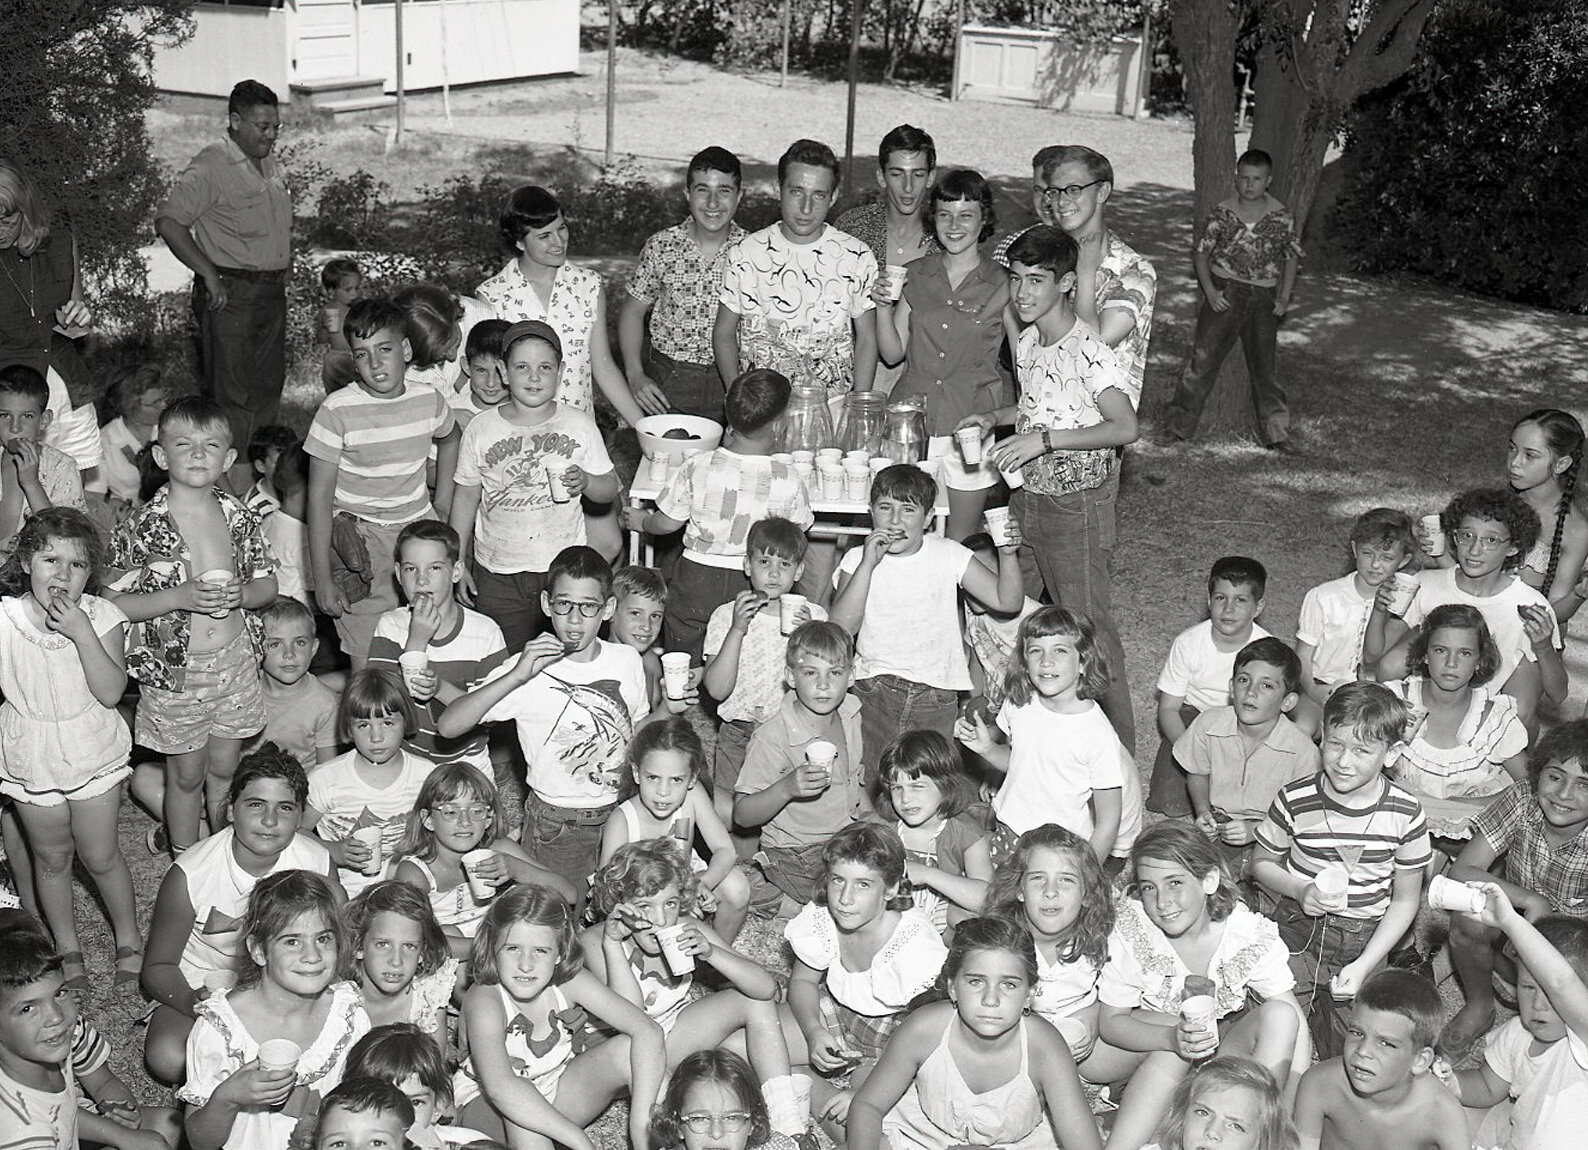 JCC hosted a Kids Day Camp in 1952